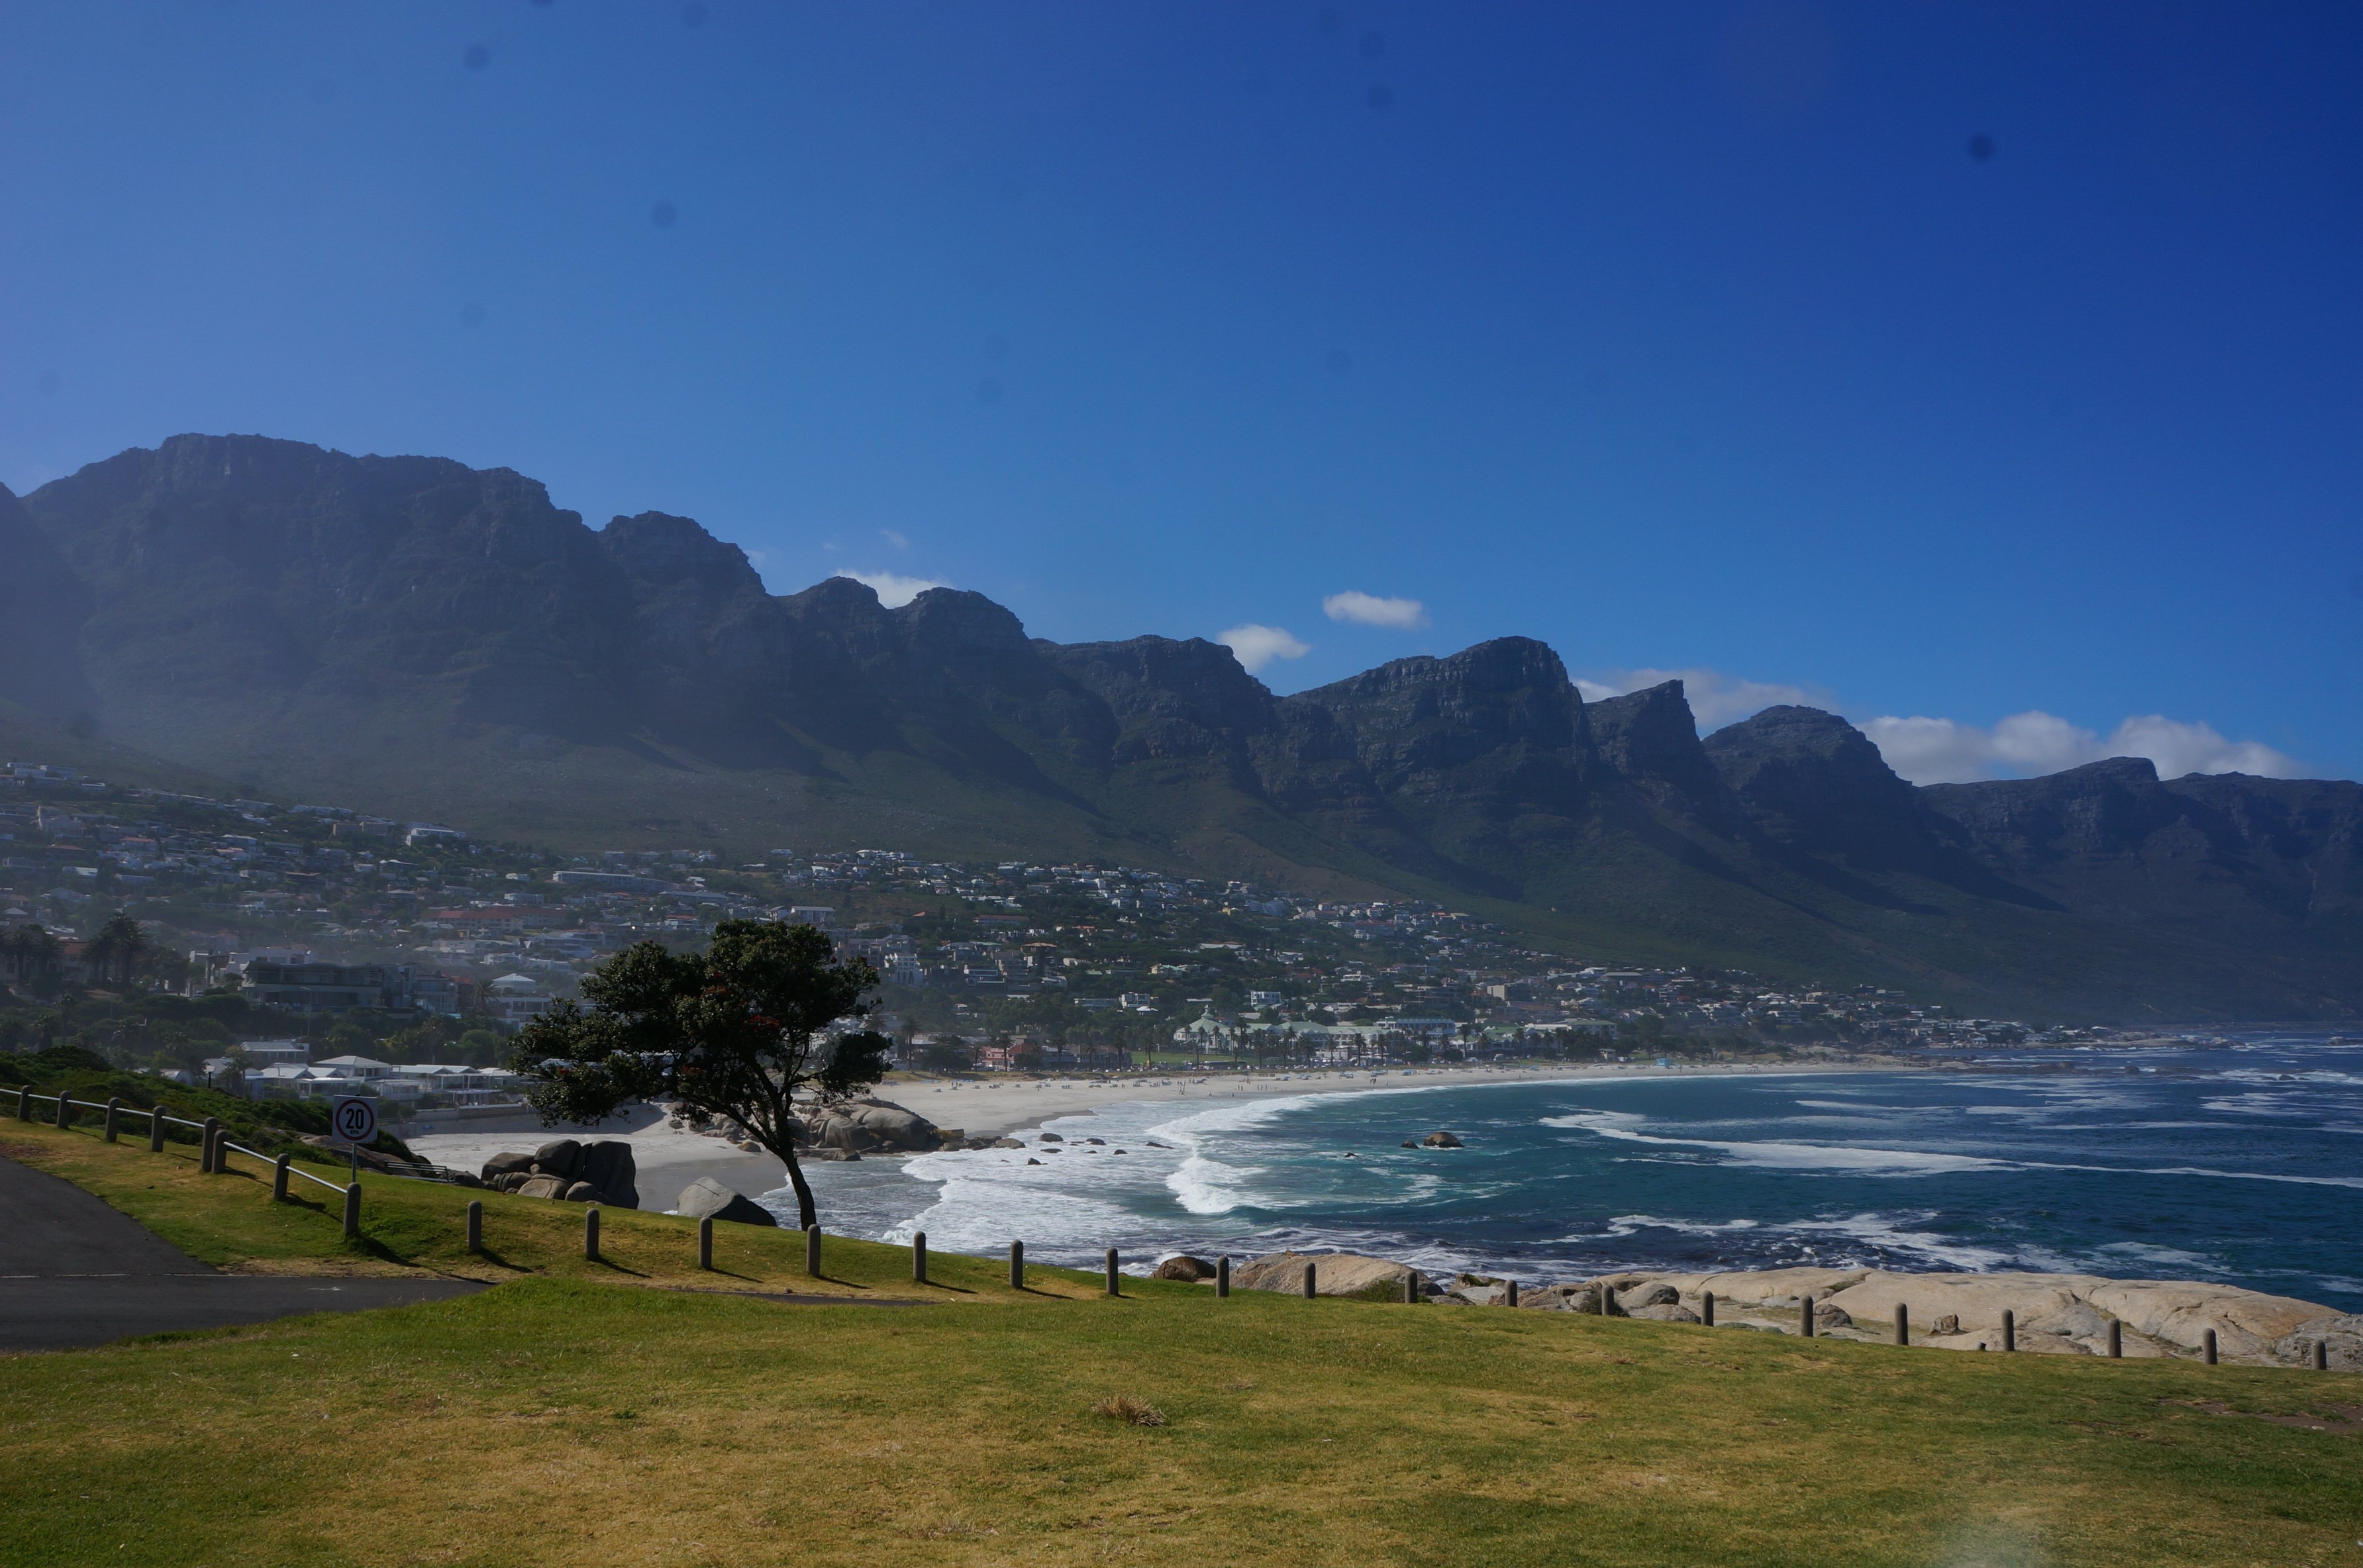 Cape Town is the most naturally beautiful city in the world in my opinion. You won't find much historical sights, or renaissance architecture, but the mountains, ocean, and beach converging in one spot just makes this place breathtaking. 